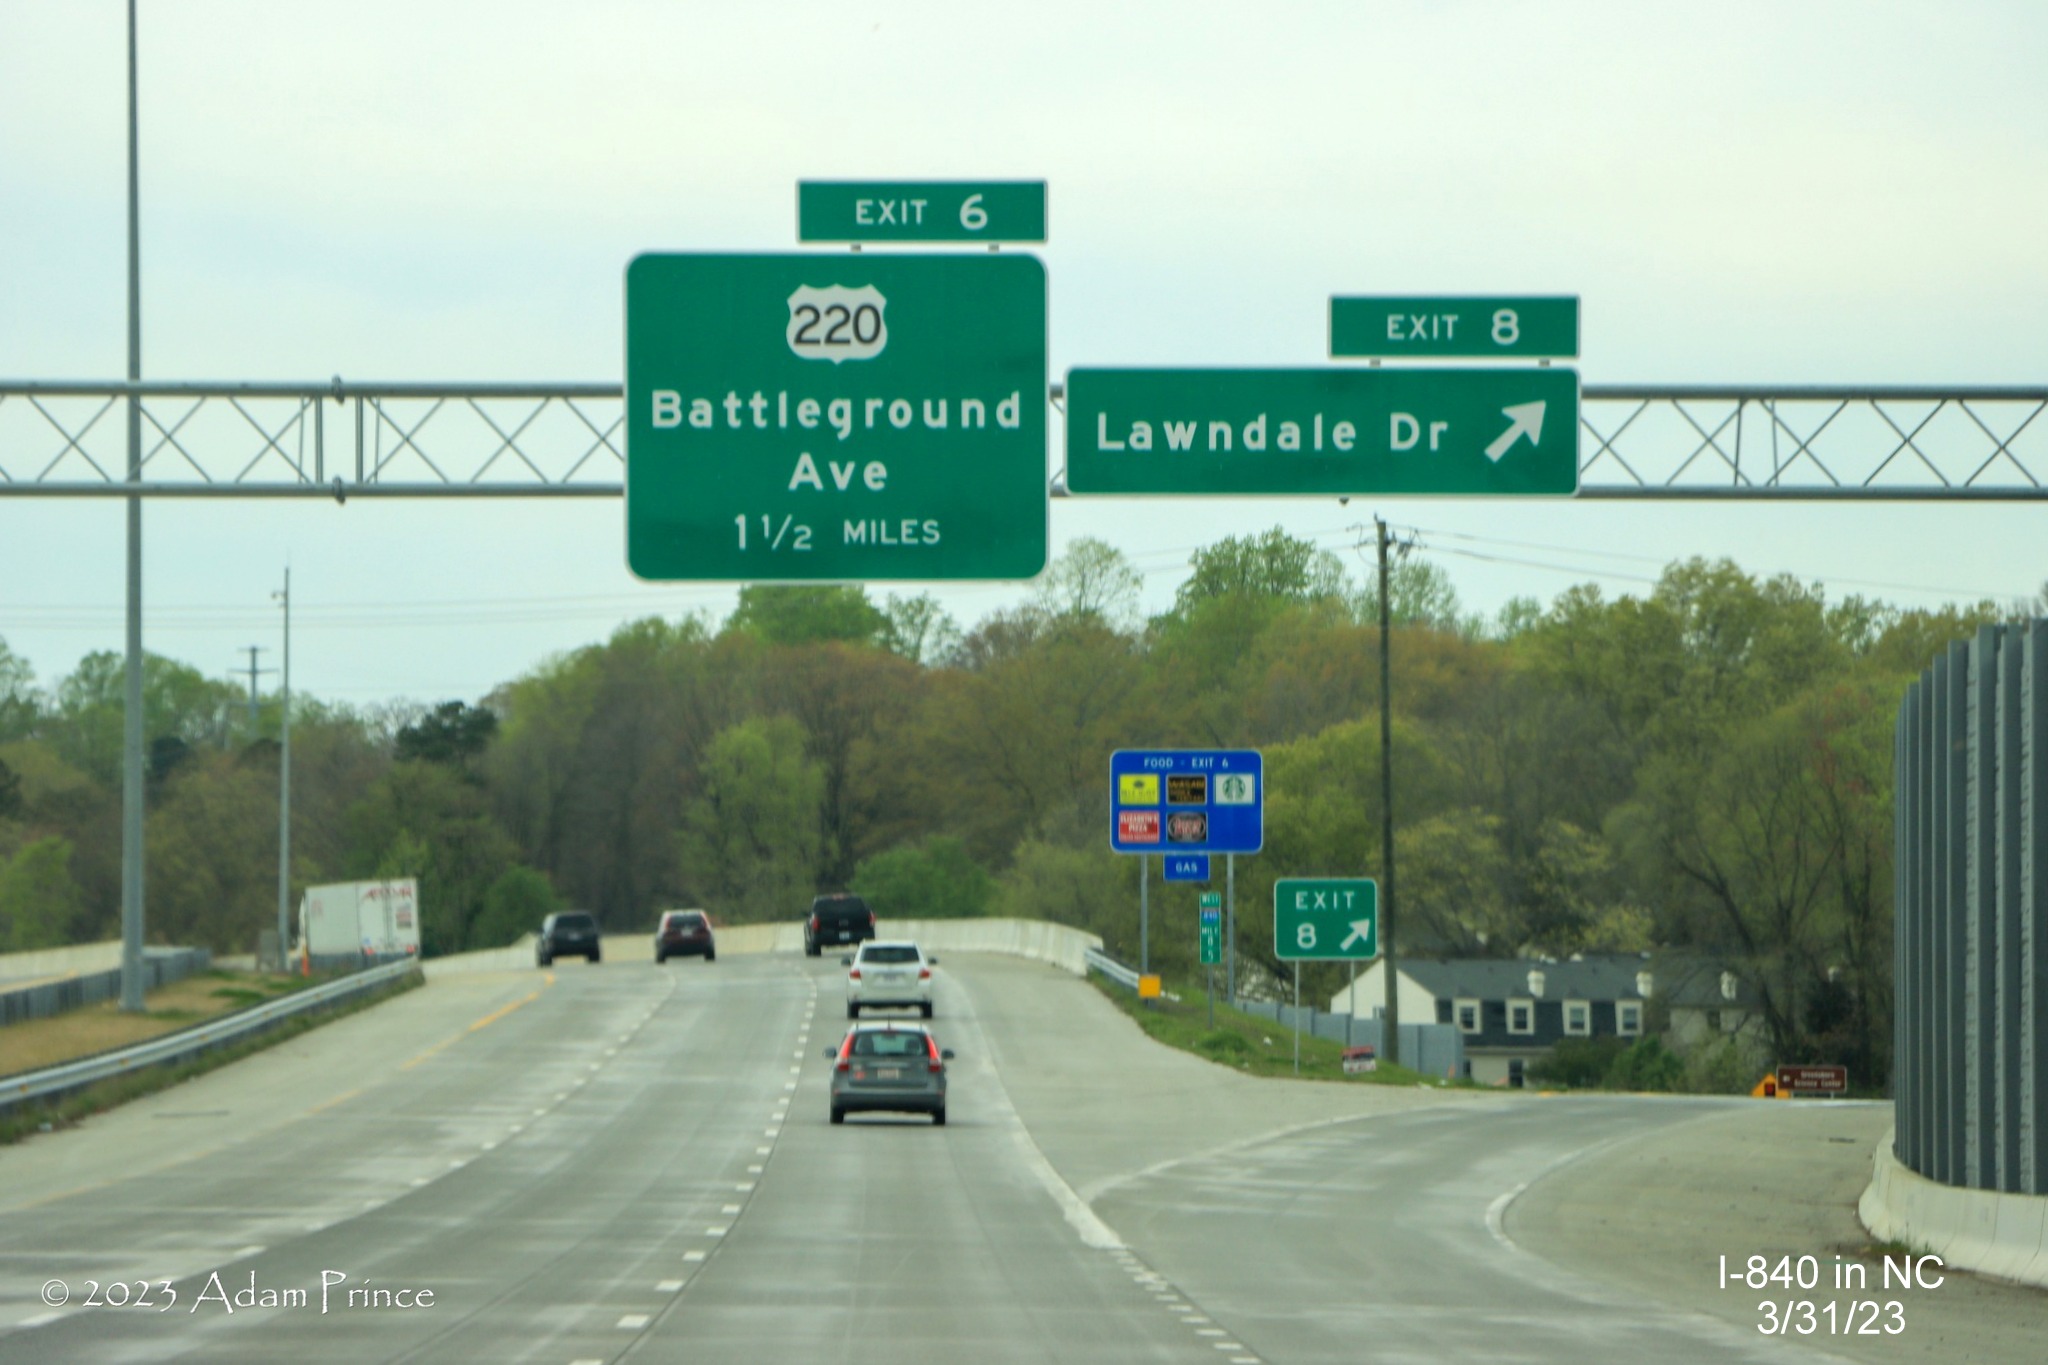 Image of 1 1/2 Miles advance sign for US 220/Battleground Avenue at ramp for Lawndale Drive on 
             I-840 West/Greensboro Urban Loop, Adam Prince, March 2023